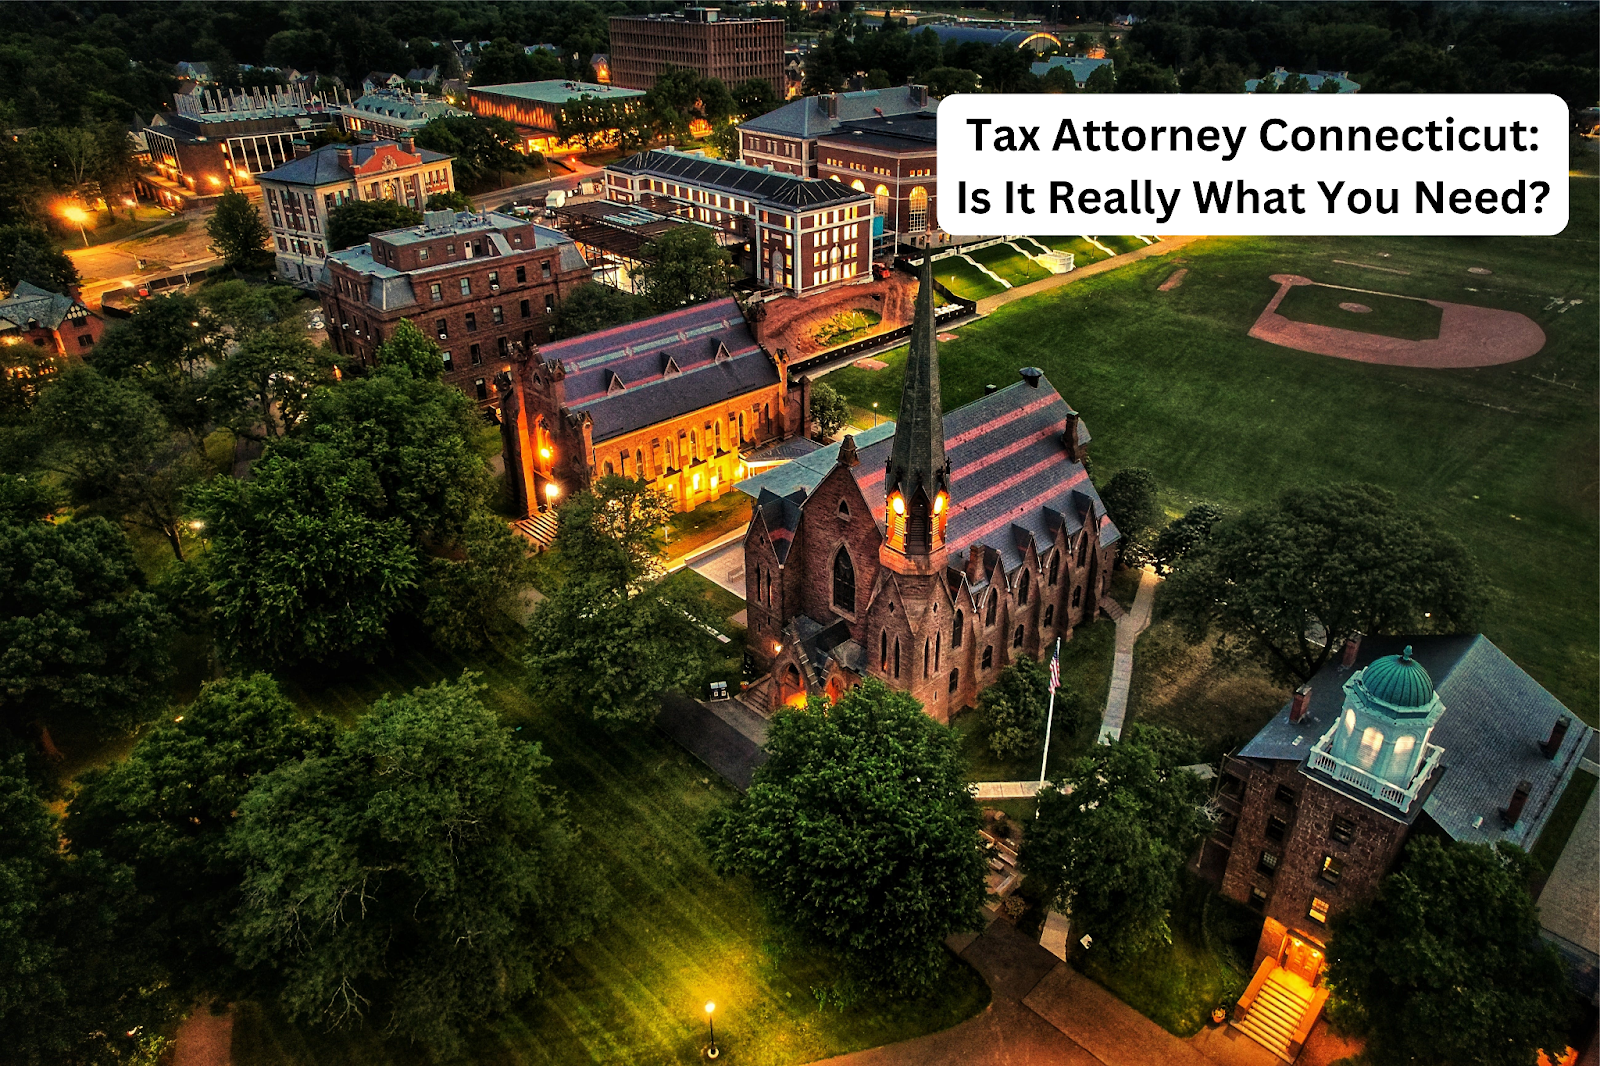 Tax Attorney Connecticut: Is It Really What You Need?